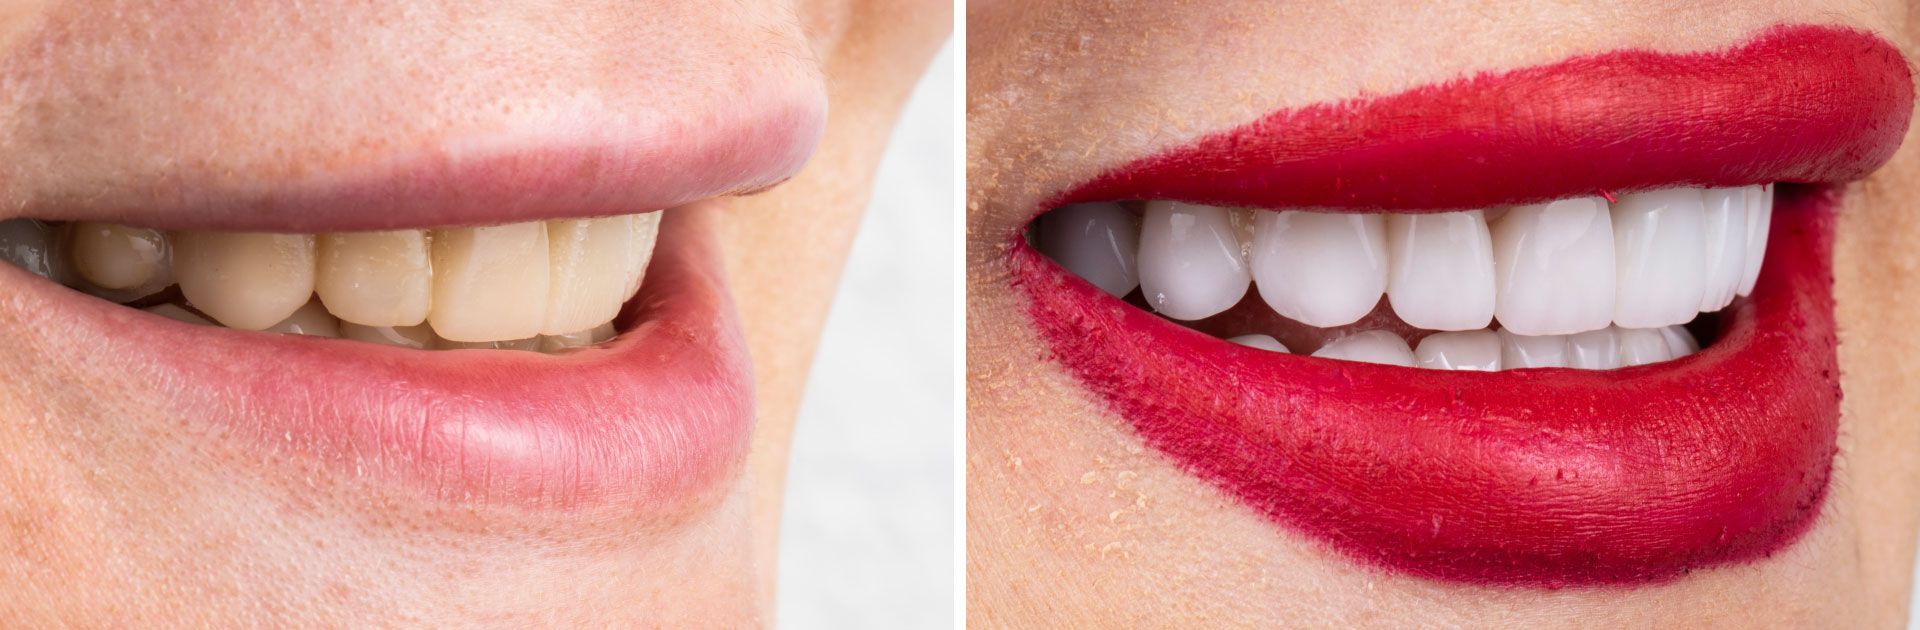 An image of a patient's teeth before and after veneers